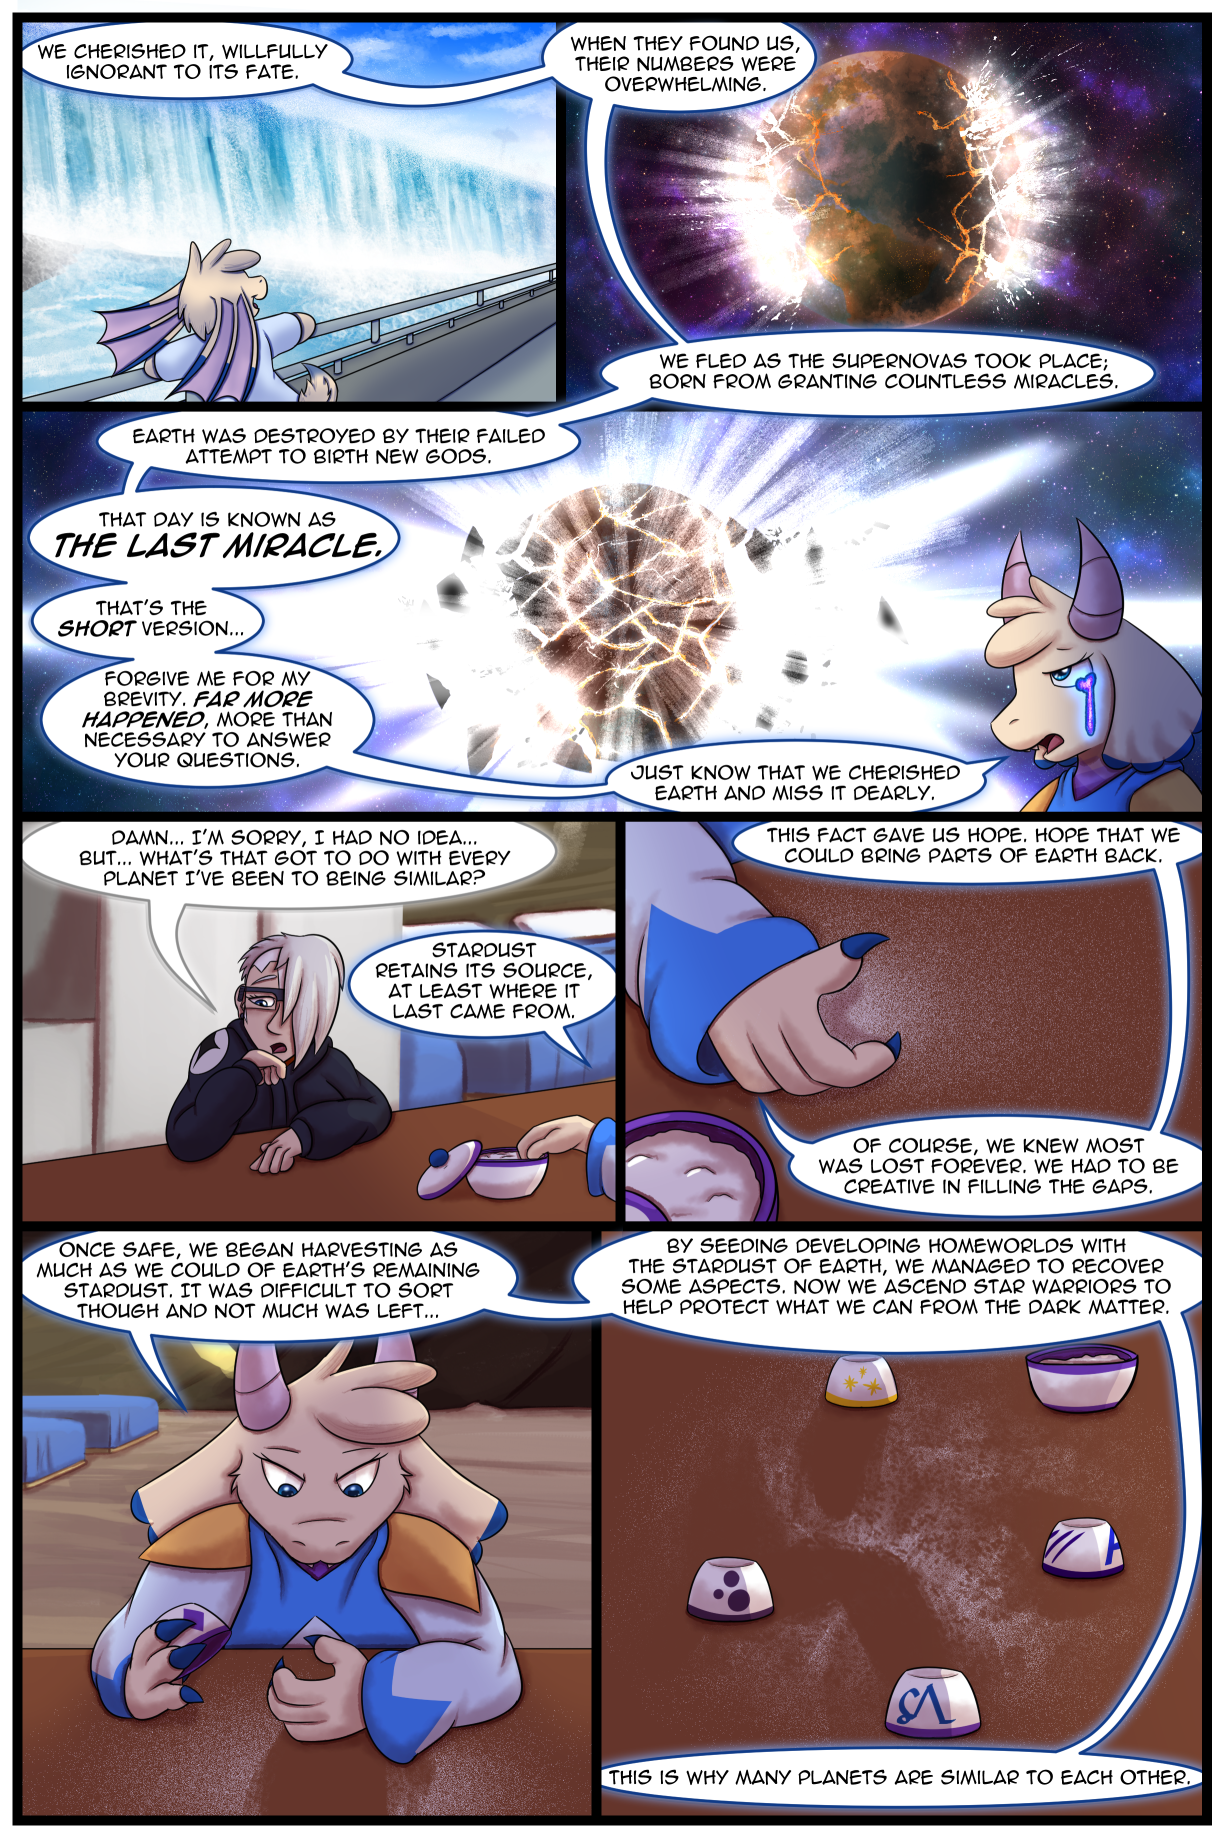 Ch5 Page 54 – The Last Miracle